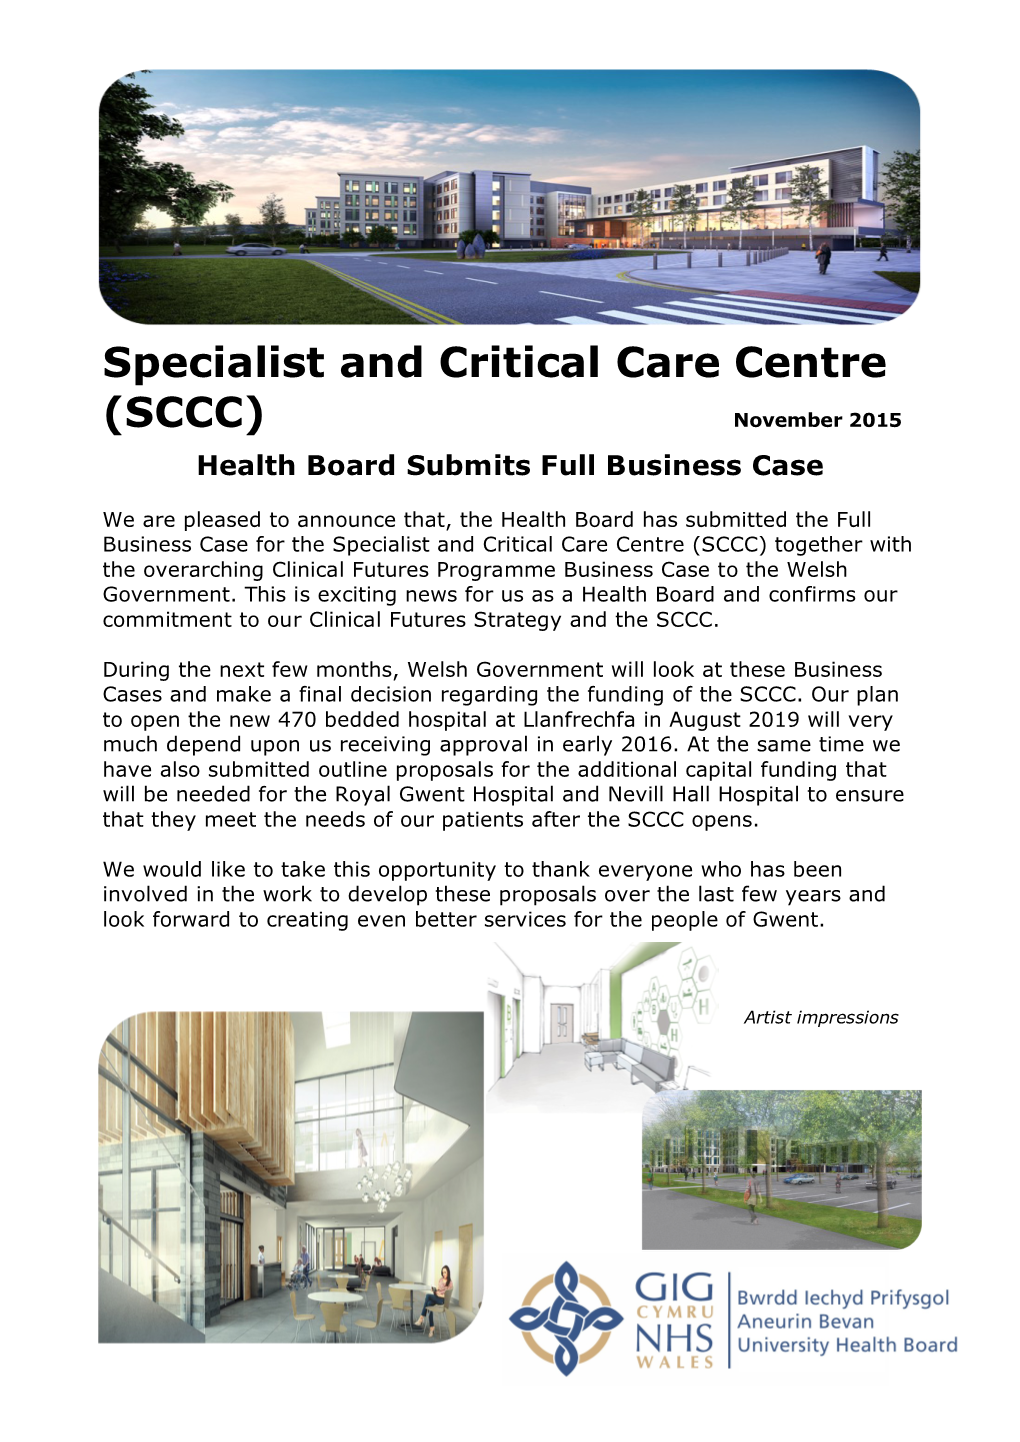 Specialist and Critical Care Centre (SCCC) Together with the Overarching Clinical Futures Programme Business Case to the Welsh Government